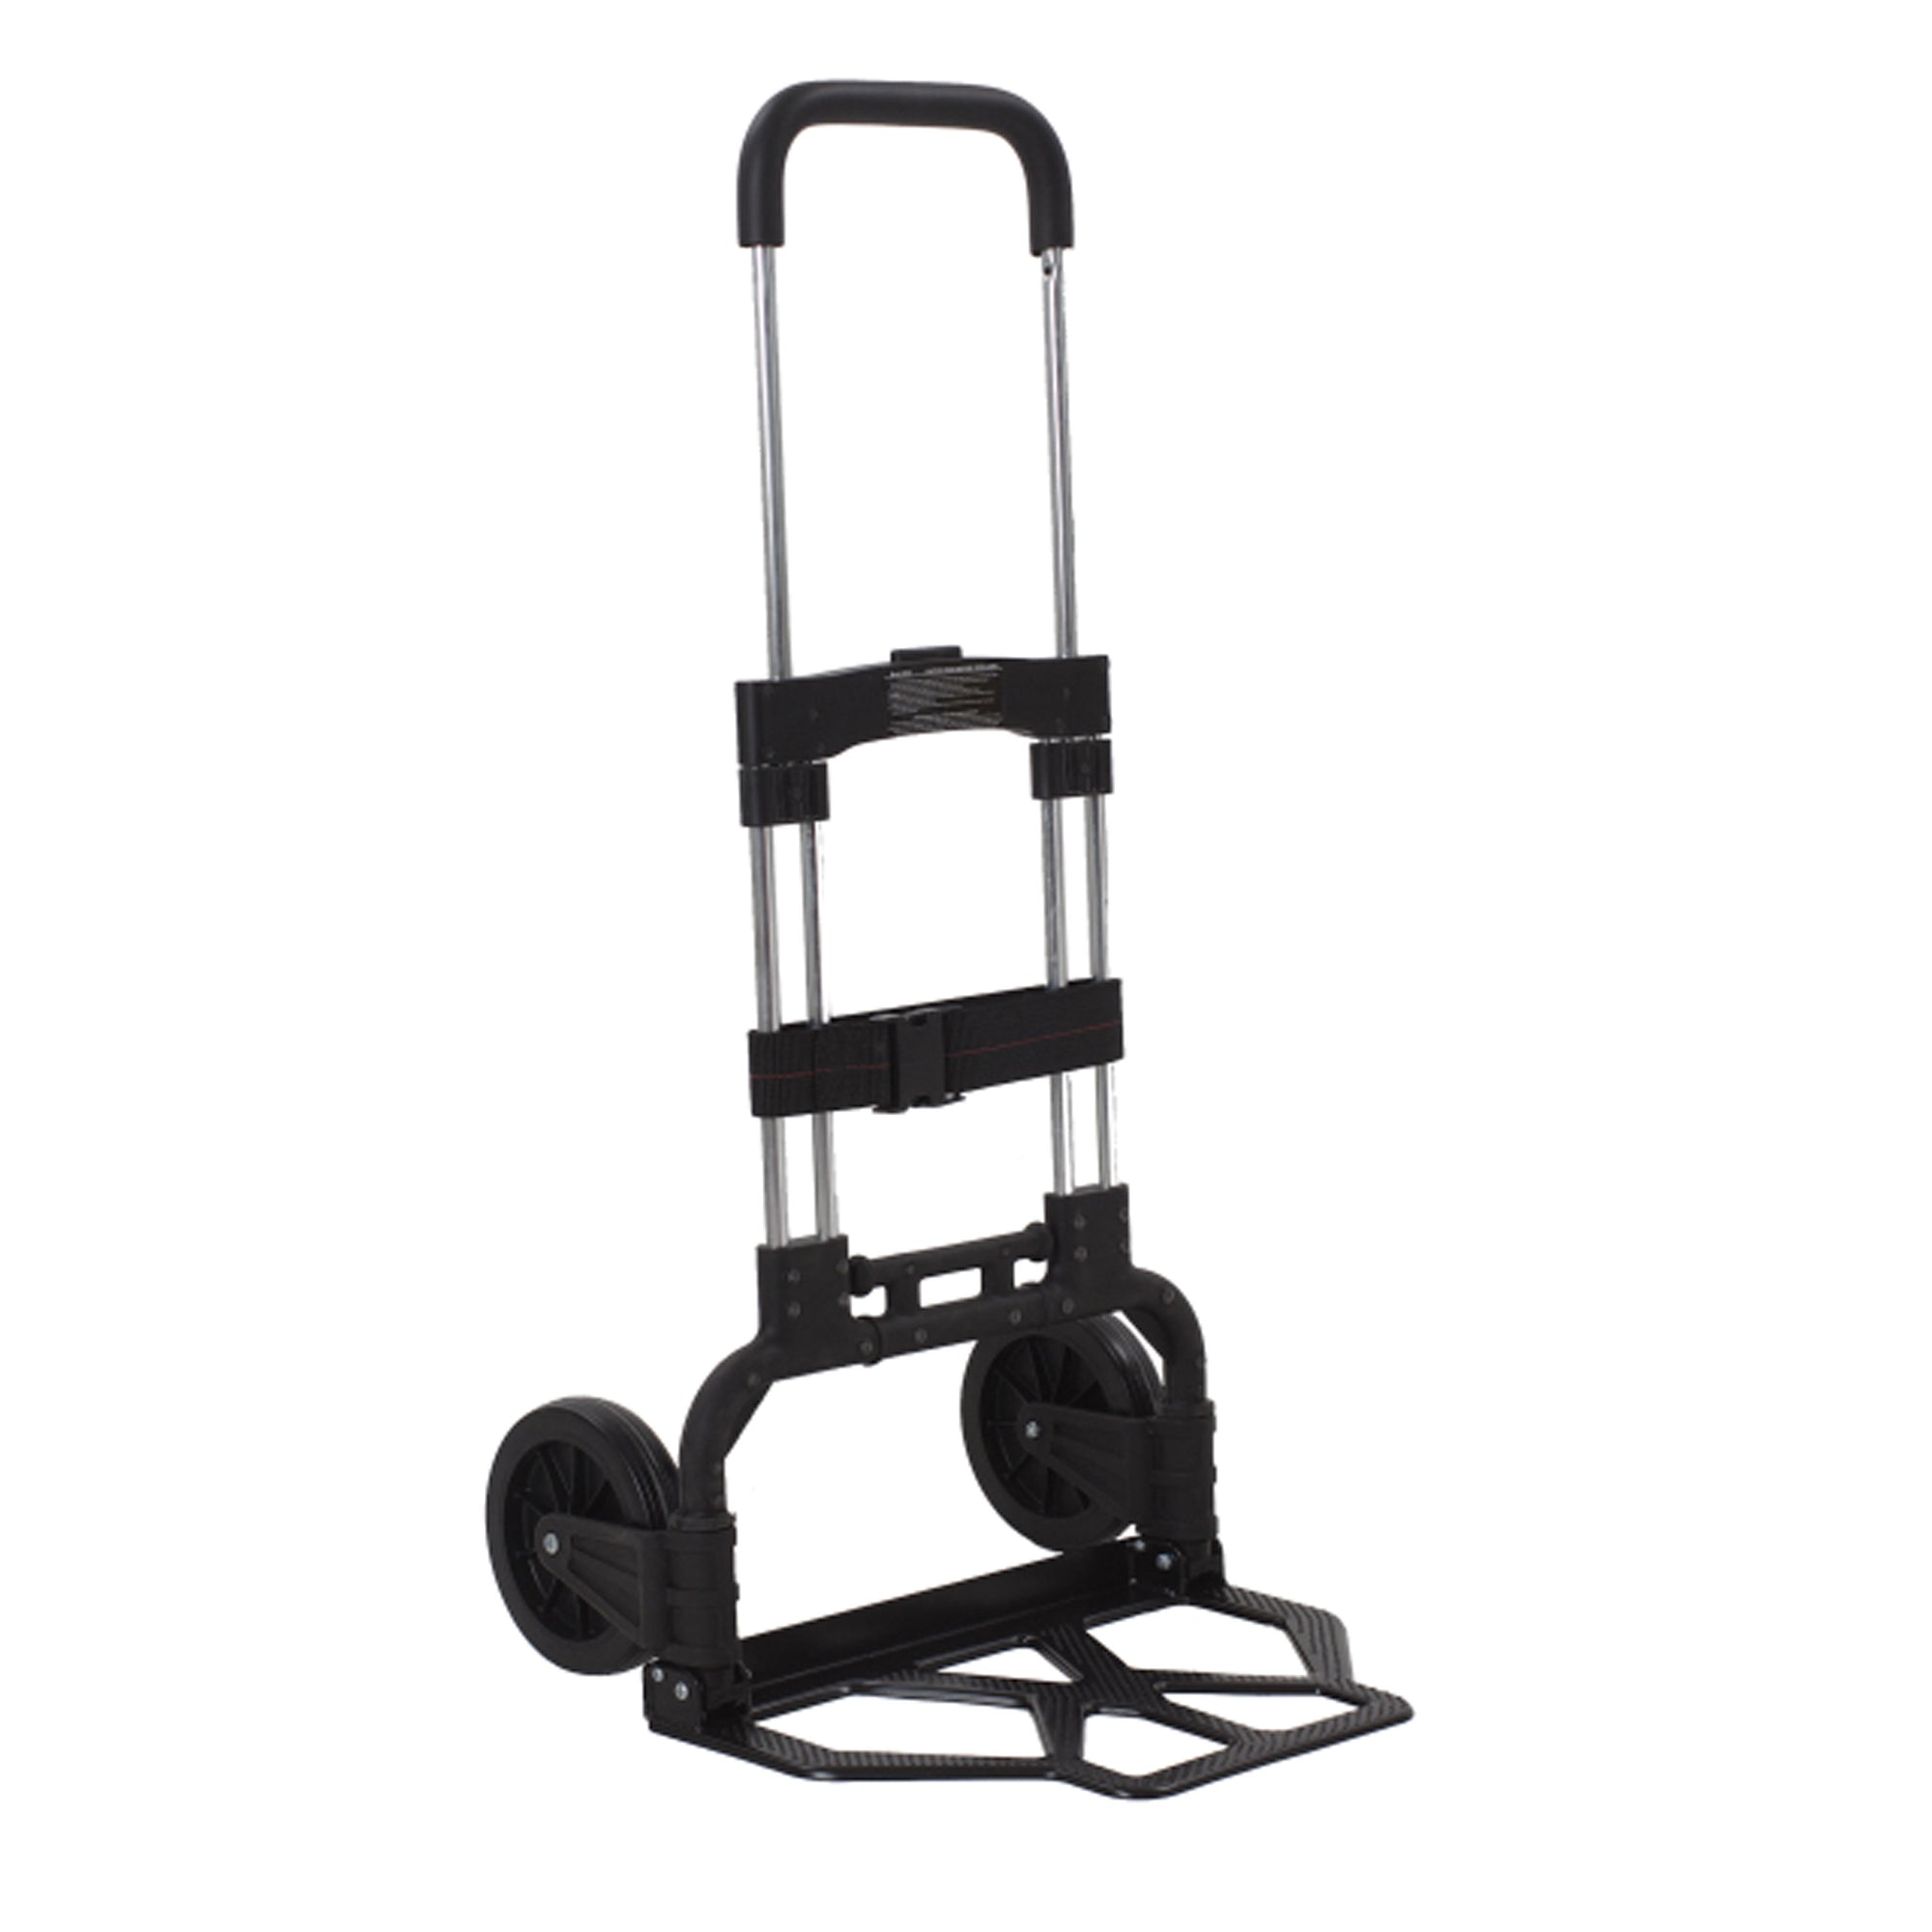 Flo-Fast 60601 Cart And Strap Compact